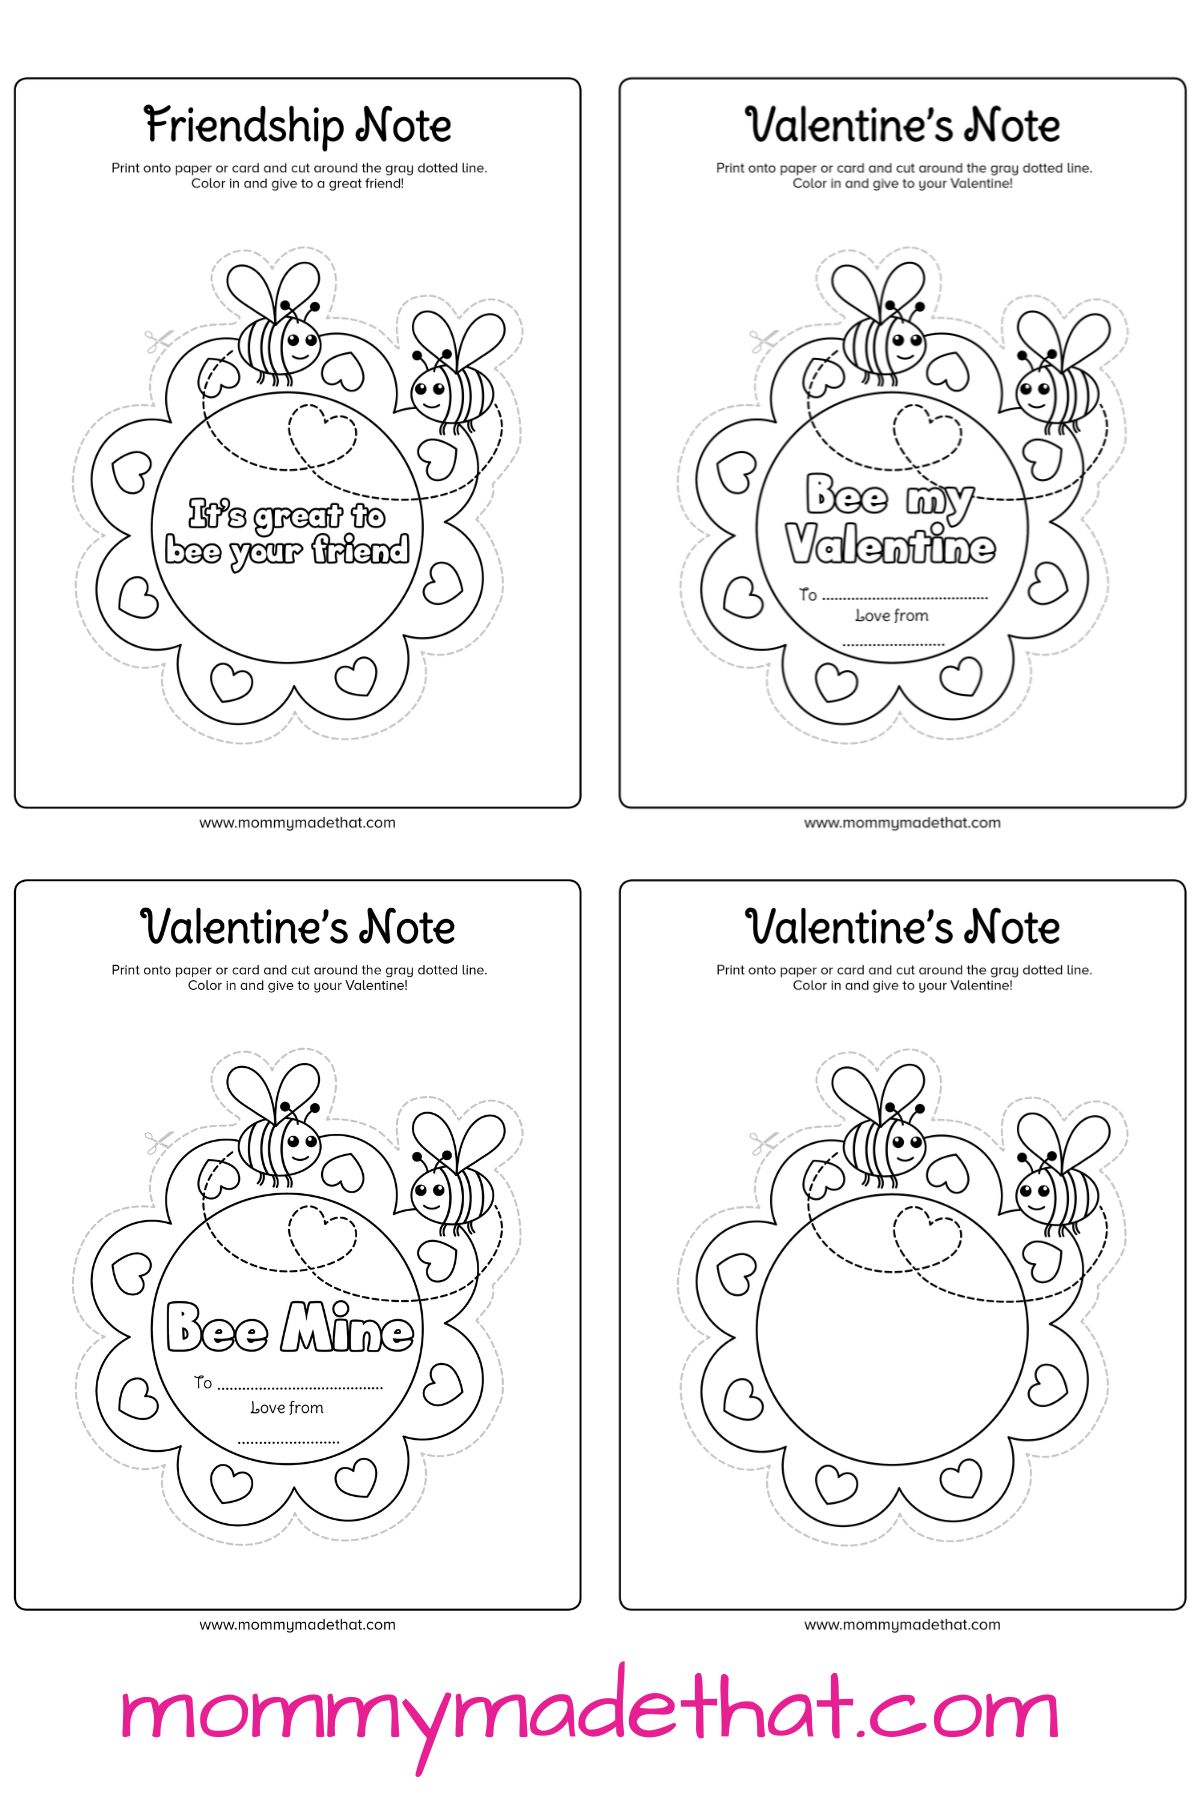 will you bee my valentine cards